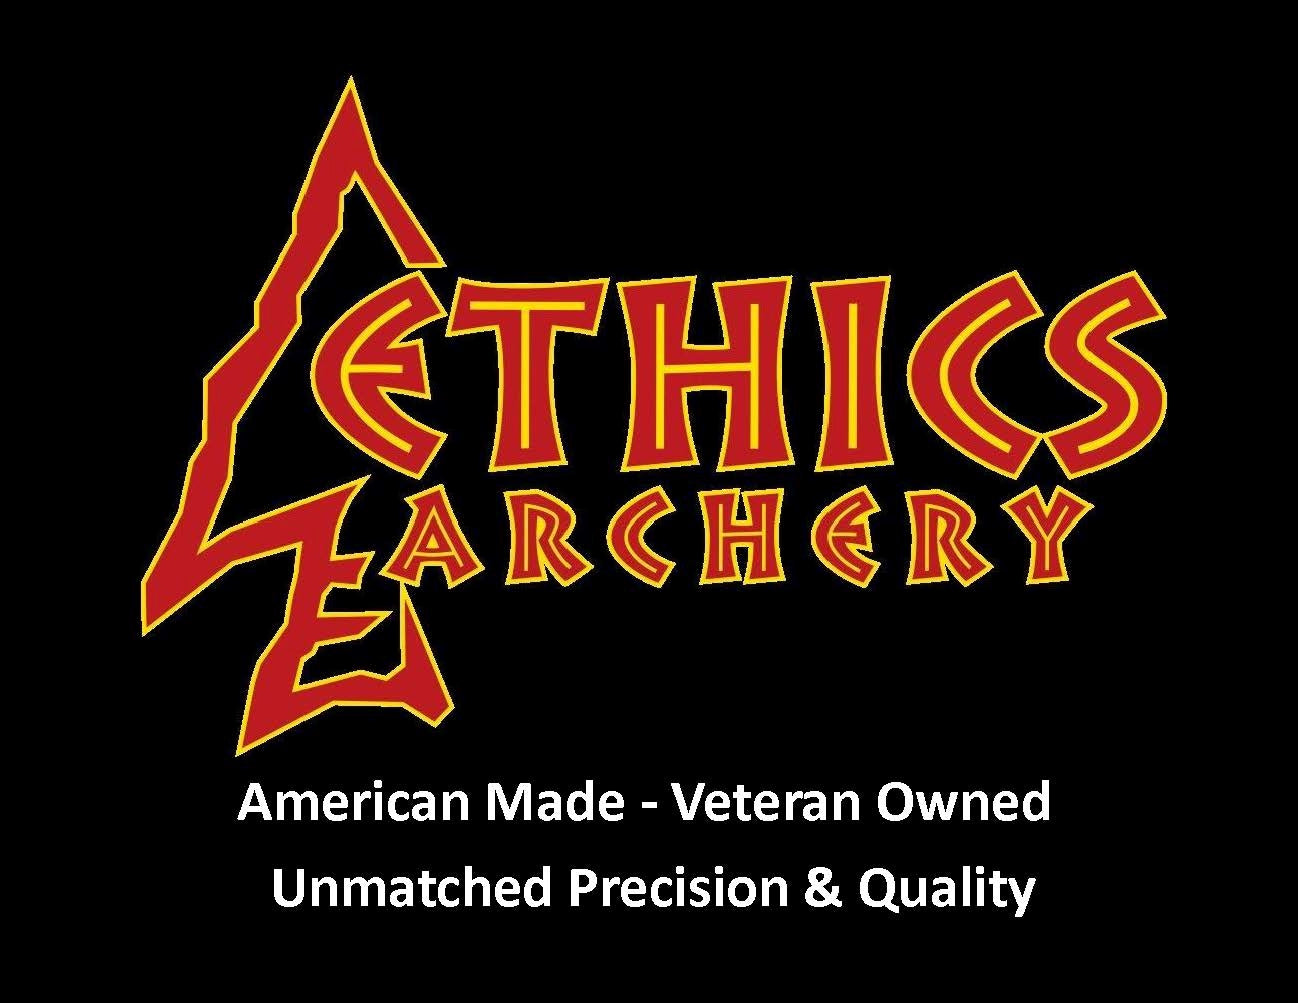 BANNER - 2 X 3 WITH ETHICS ARCHERY LOGO